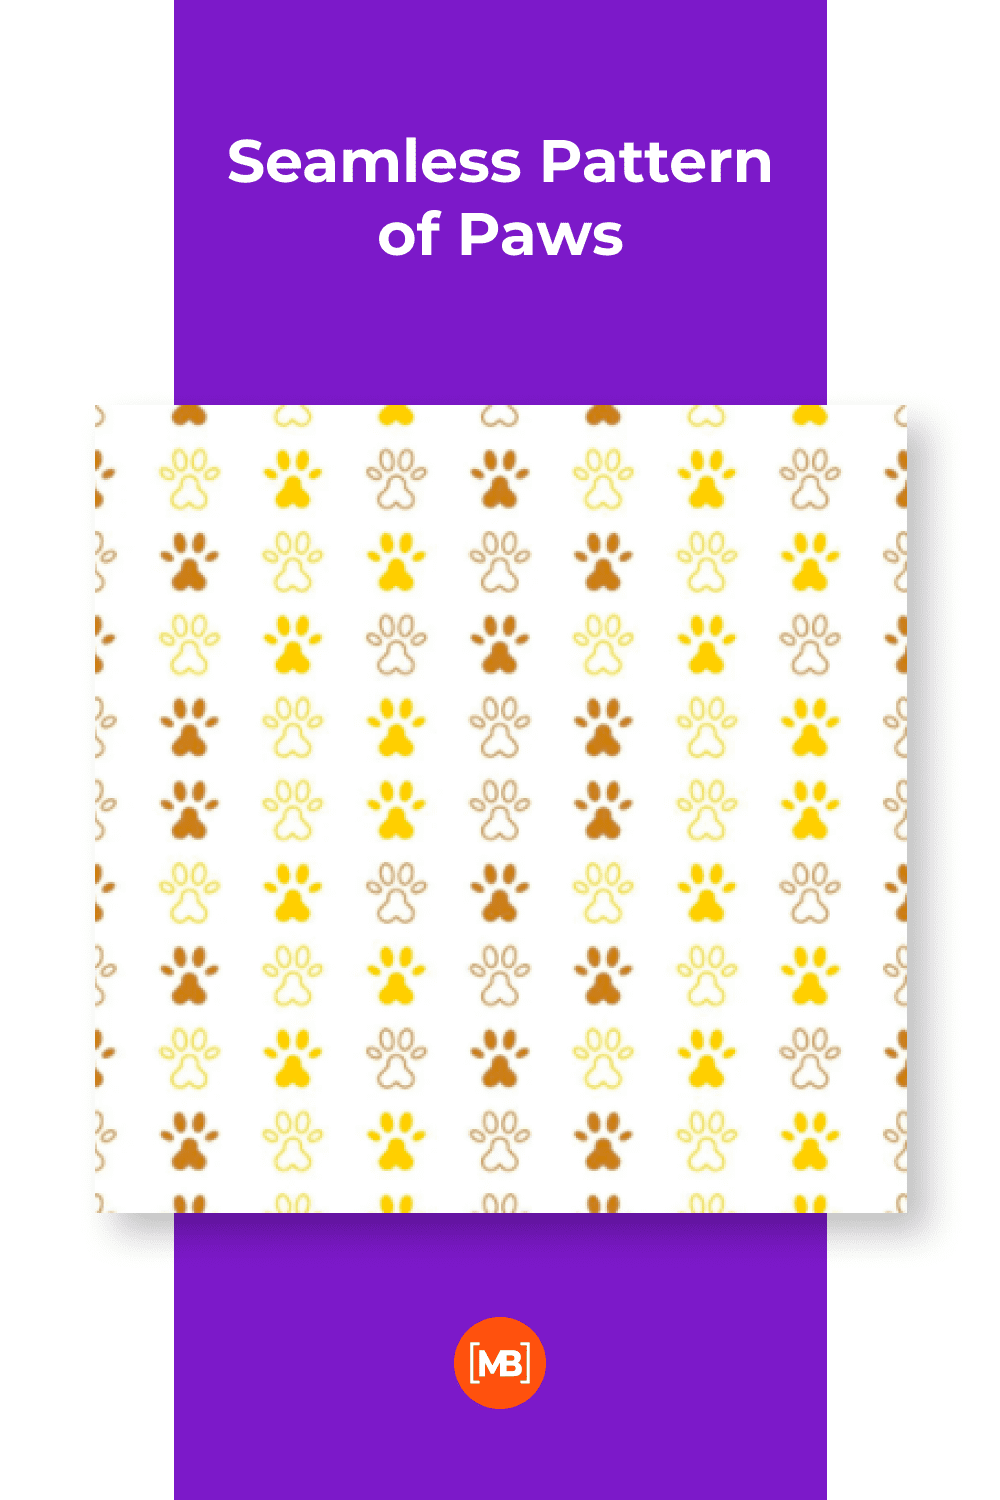 Seamless Pattern of Paws.